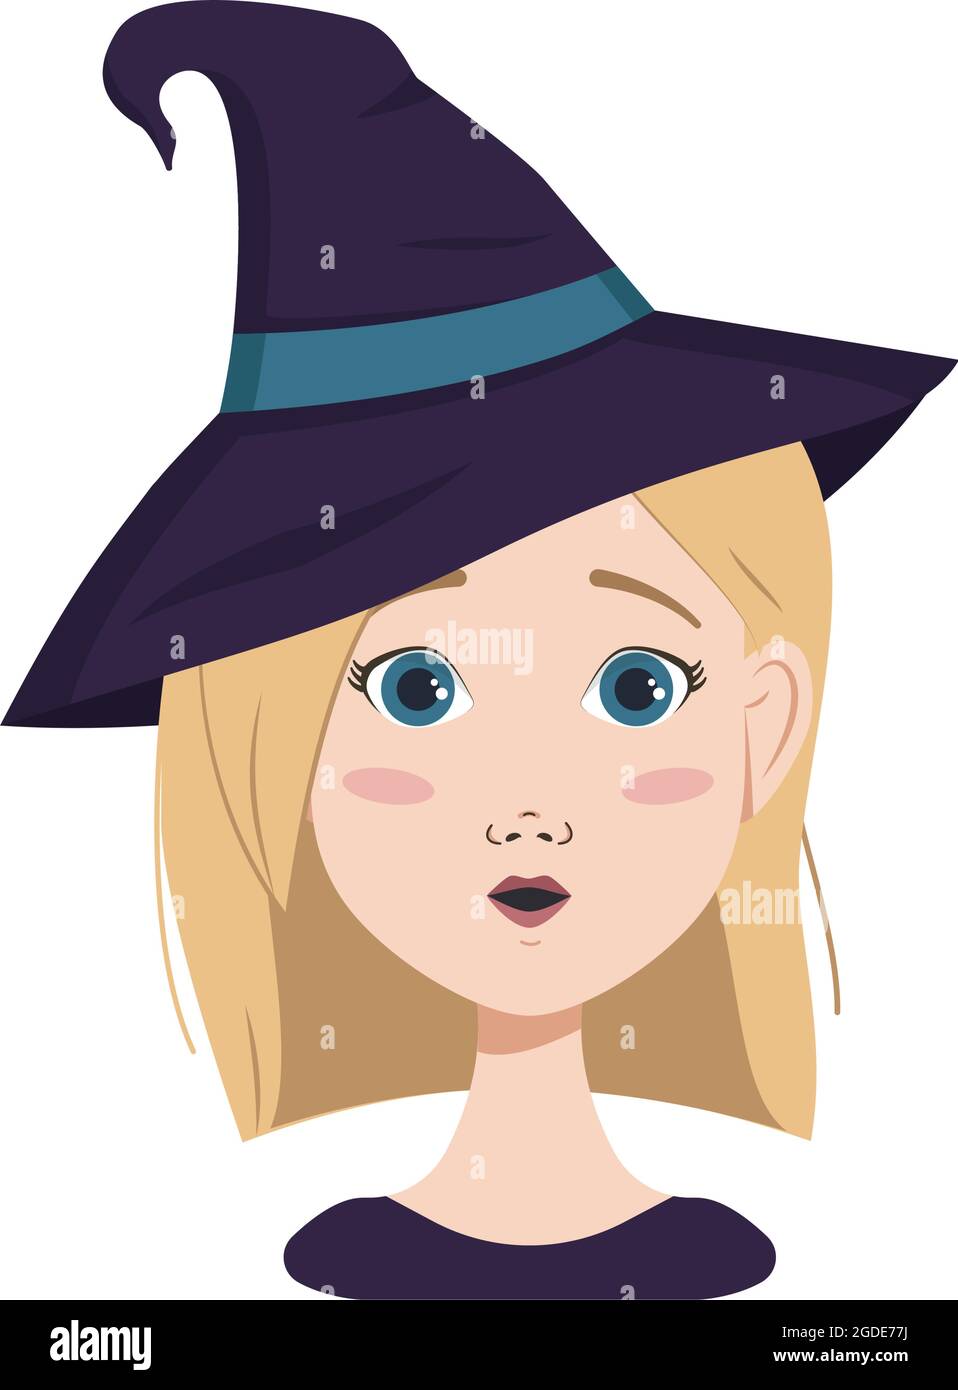 Avatar of a woman with blonde hair and blue eyes, surprise emotions, open eyed face and round mouth wearing a witch hat. Girl in Halloween costume Stock Vector